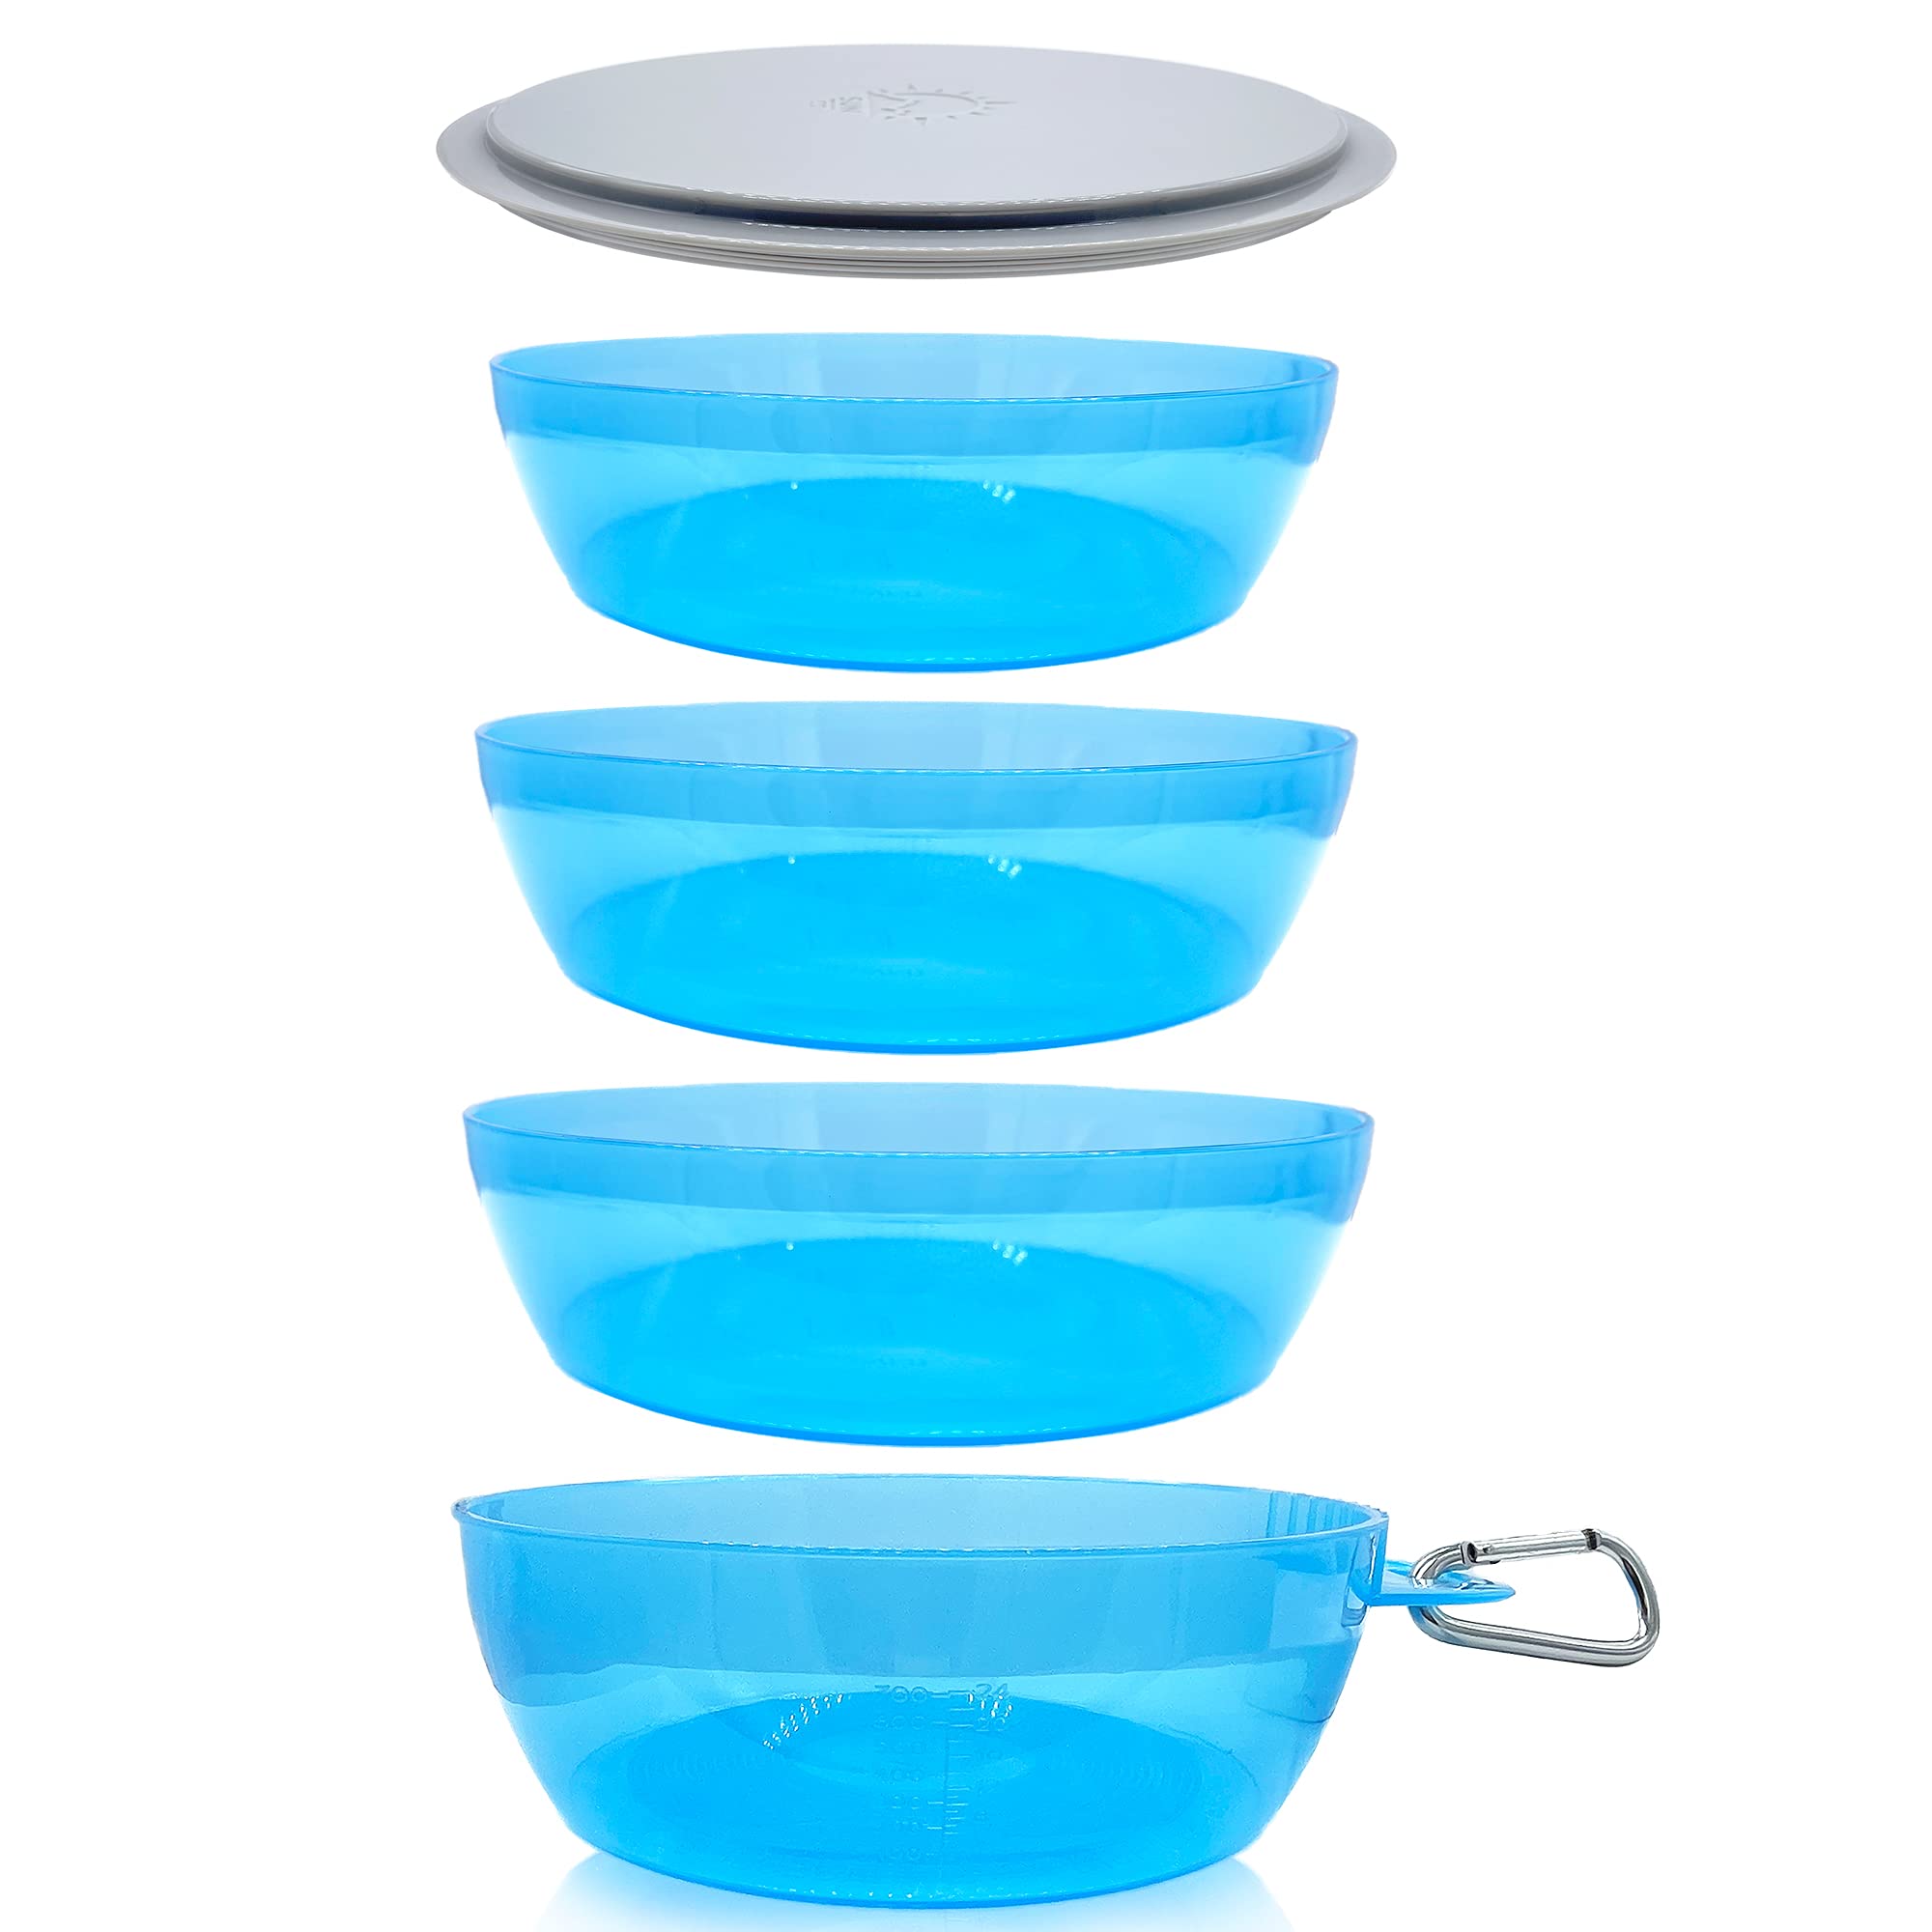 Sun Company Zero Bowls - 4-Pack of Stackable Nesting Bowls for Camping with  Water-Tight Lid, Dishwasher-Safe Space-Saving Travel Mess Kit